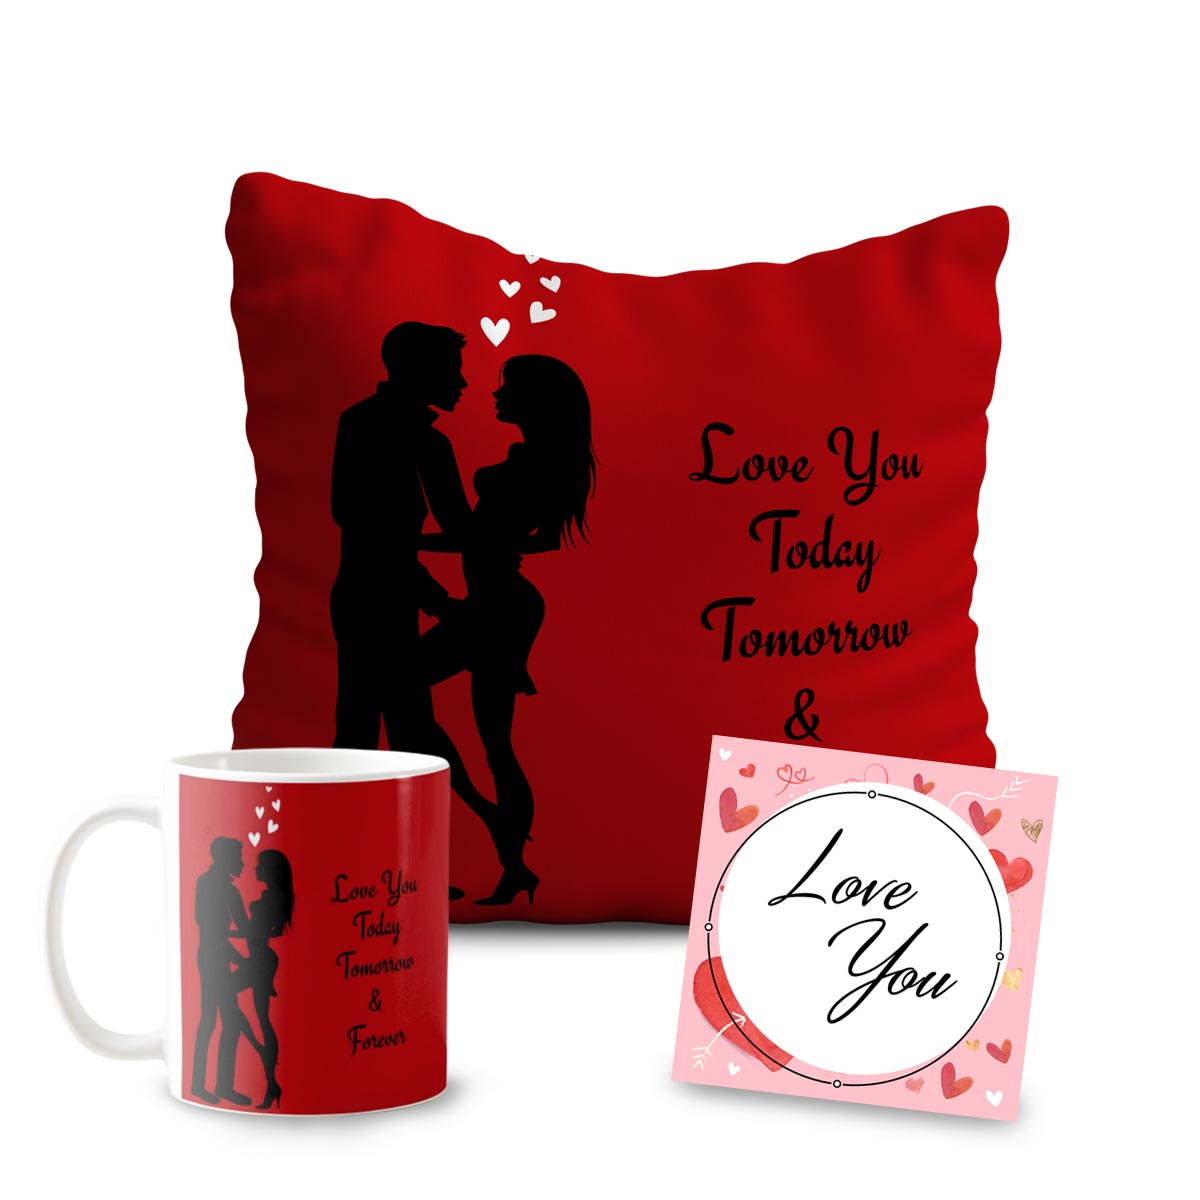 Love You Today Tomorrow and Forever 3 Piece Gift Hamper-1